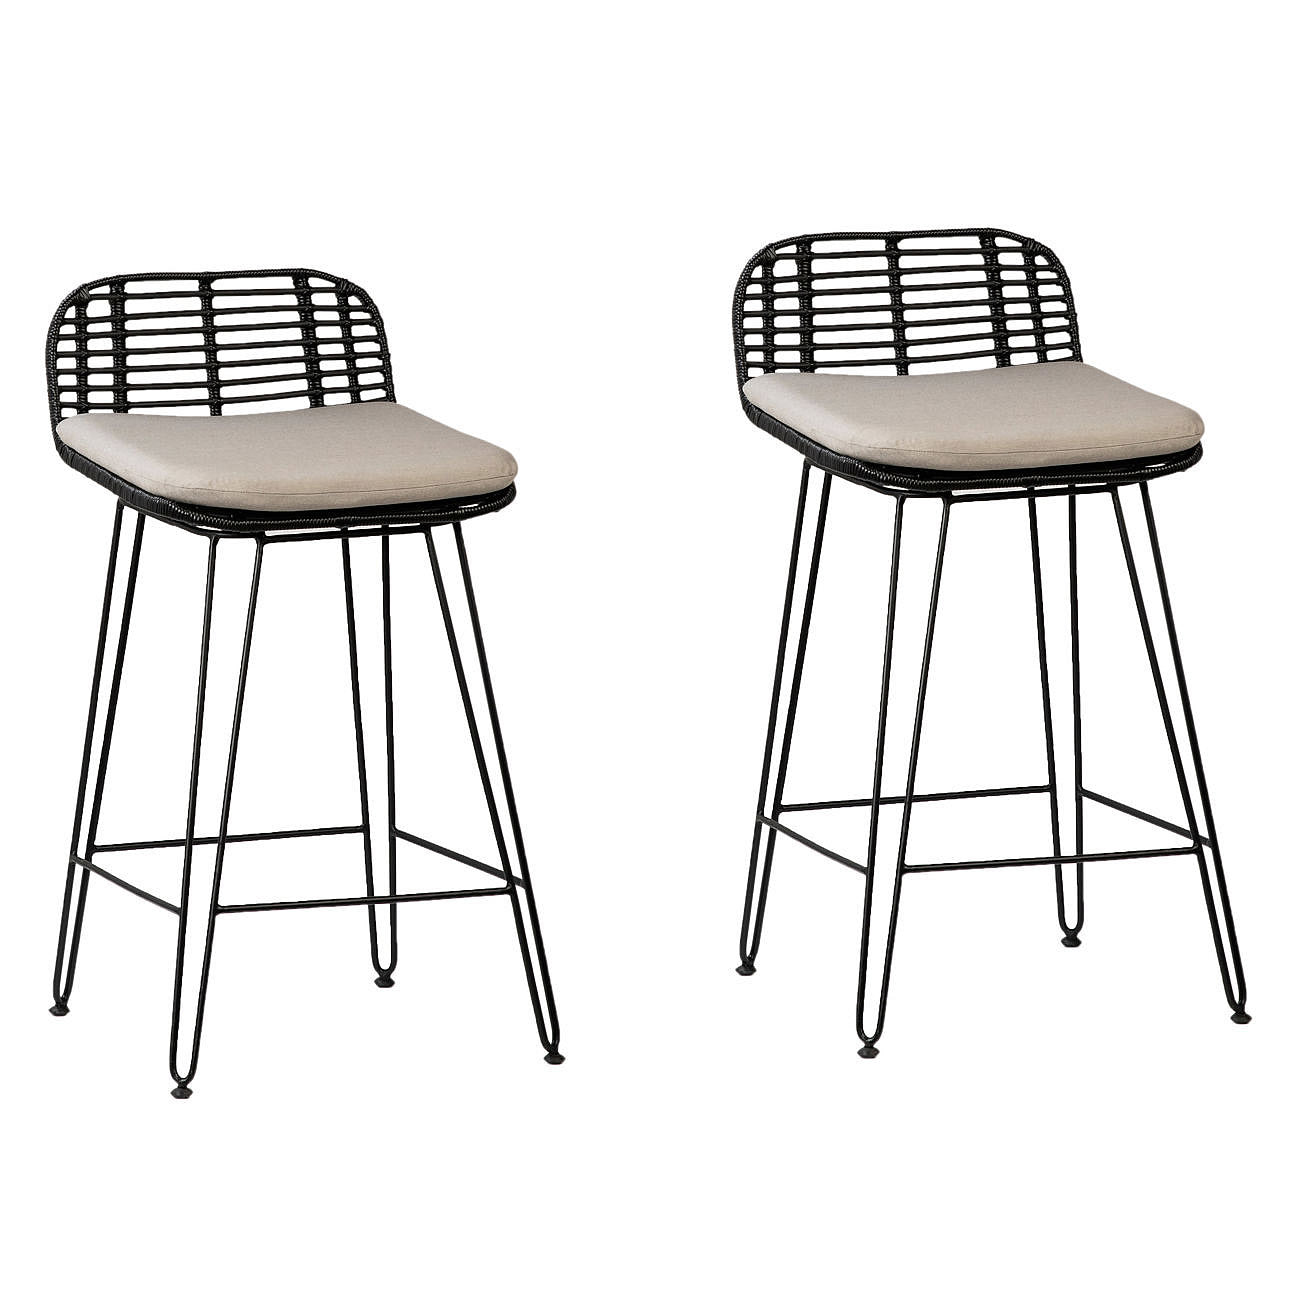 set-of-2-lightweight-in-or-outddor-stools